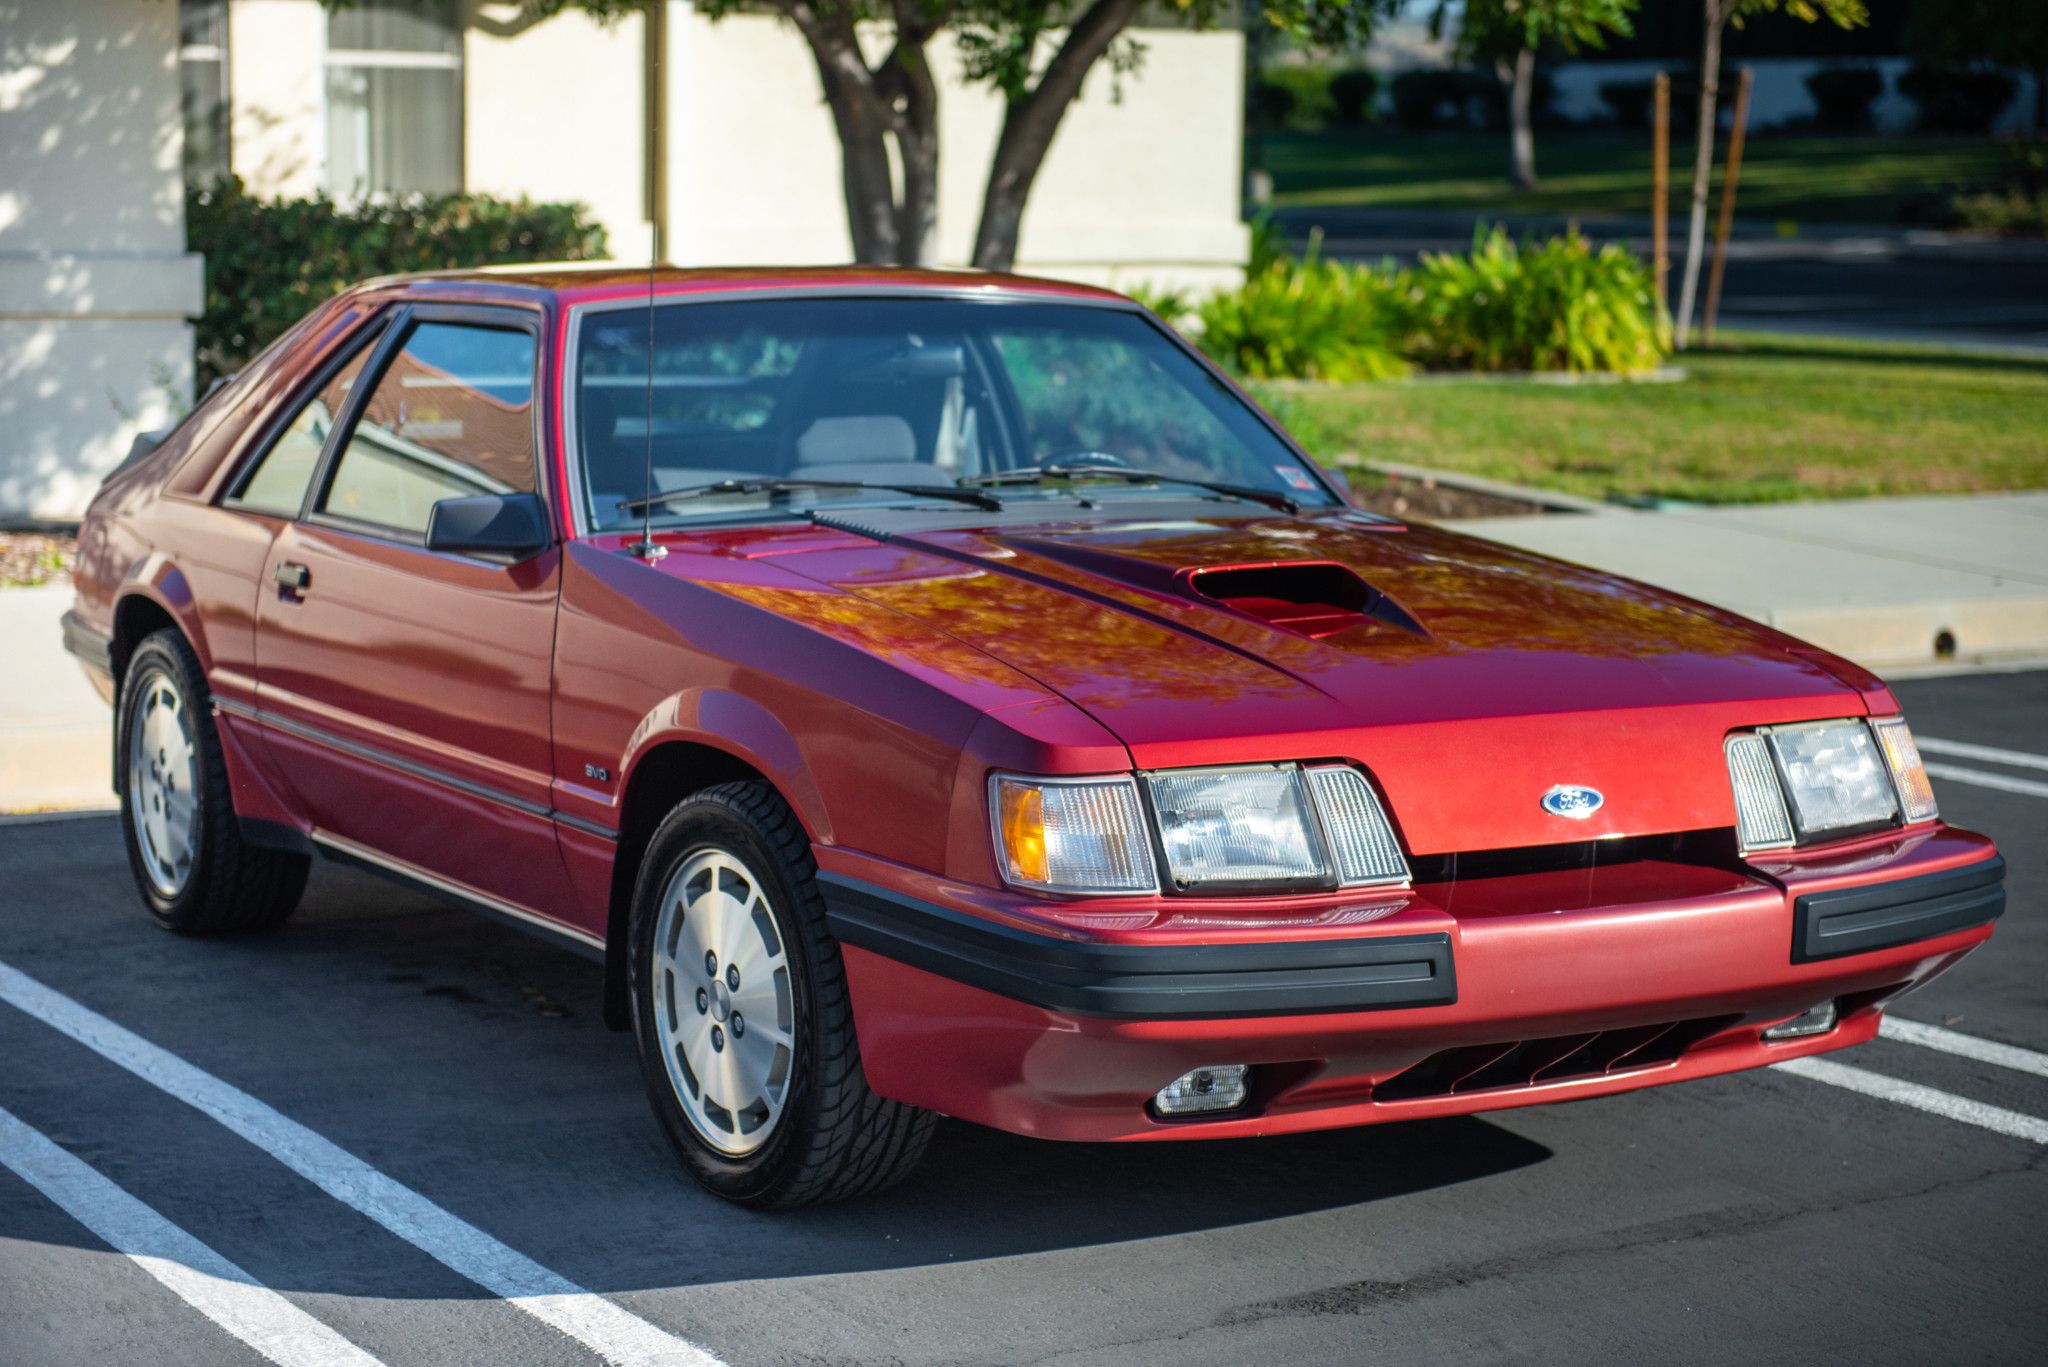 1984 Ford Mustang SVO in a Parking Lot